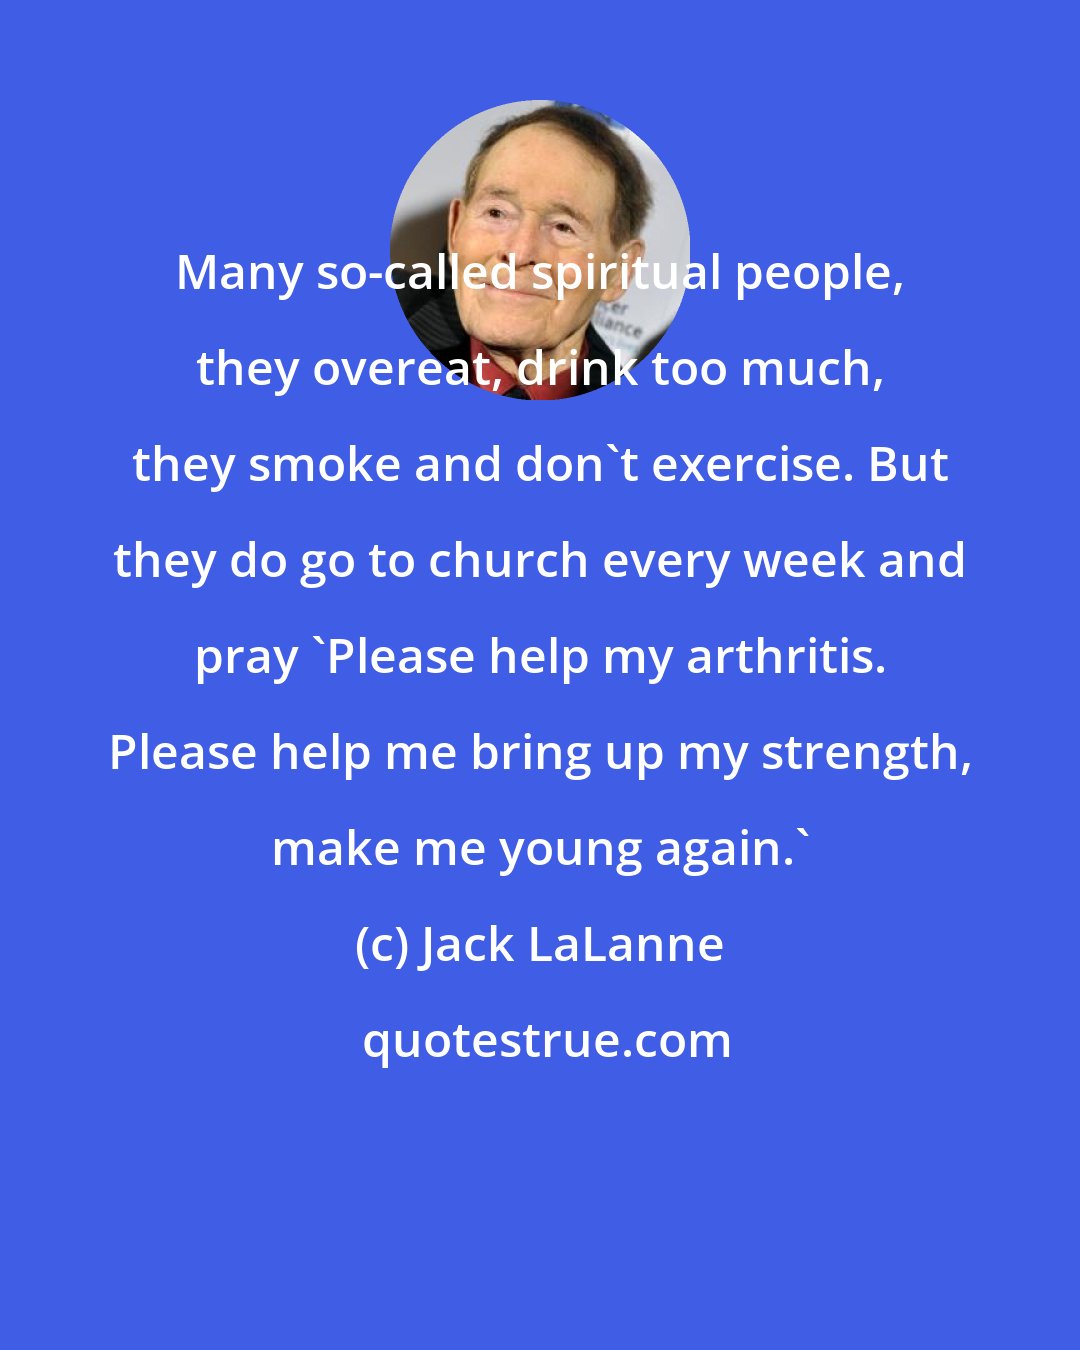 Jack LaLanne: Many so-called spiritual people, they overeat, drink too much, they smoke and don't exercise. But they do go to church every week and pray 'Please help my arthritis. Please help me bring up my strength, make me young again.'